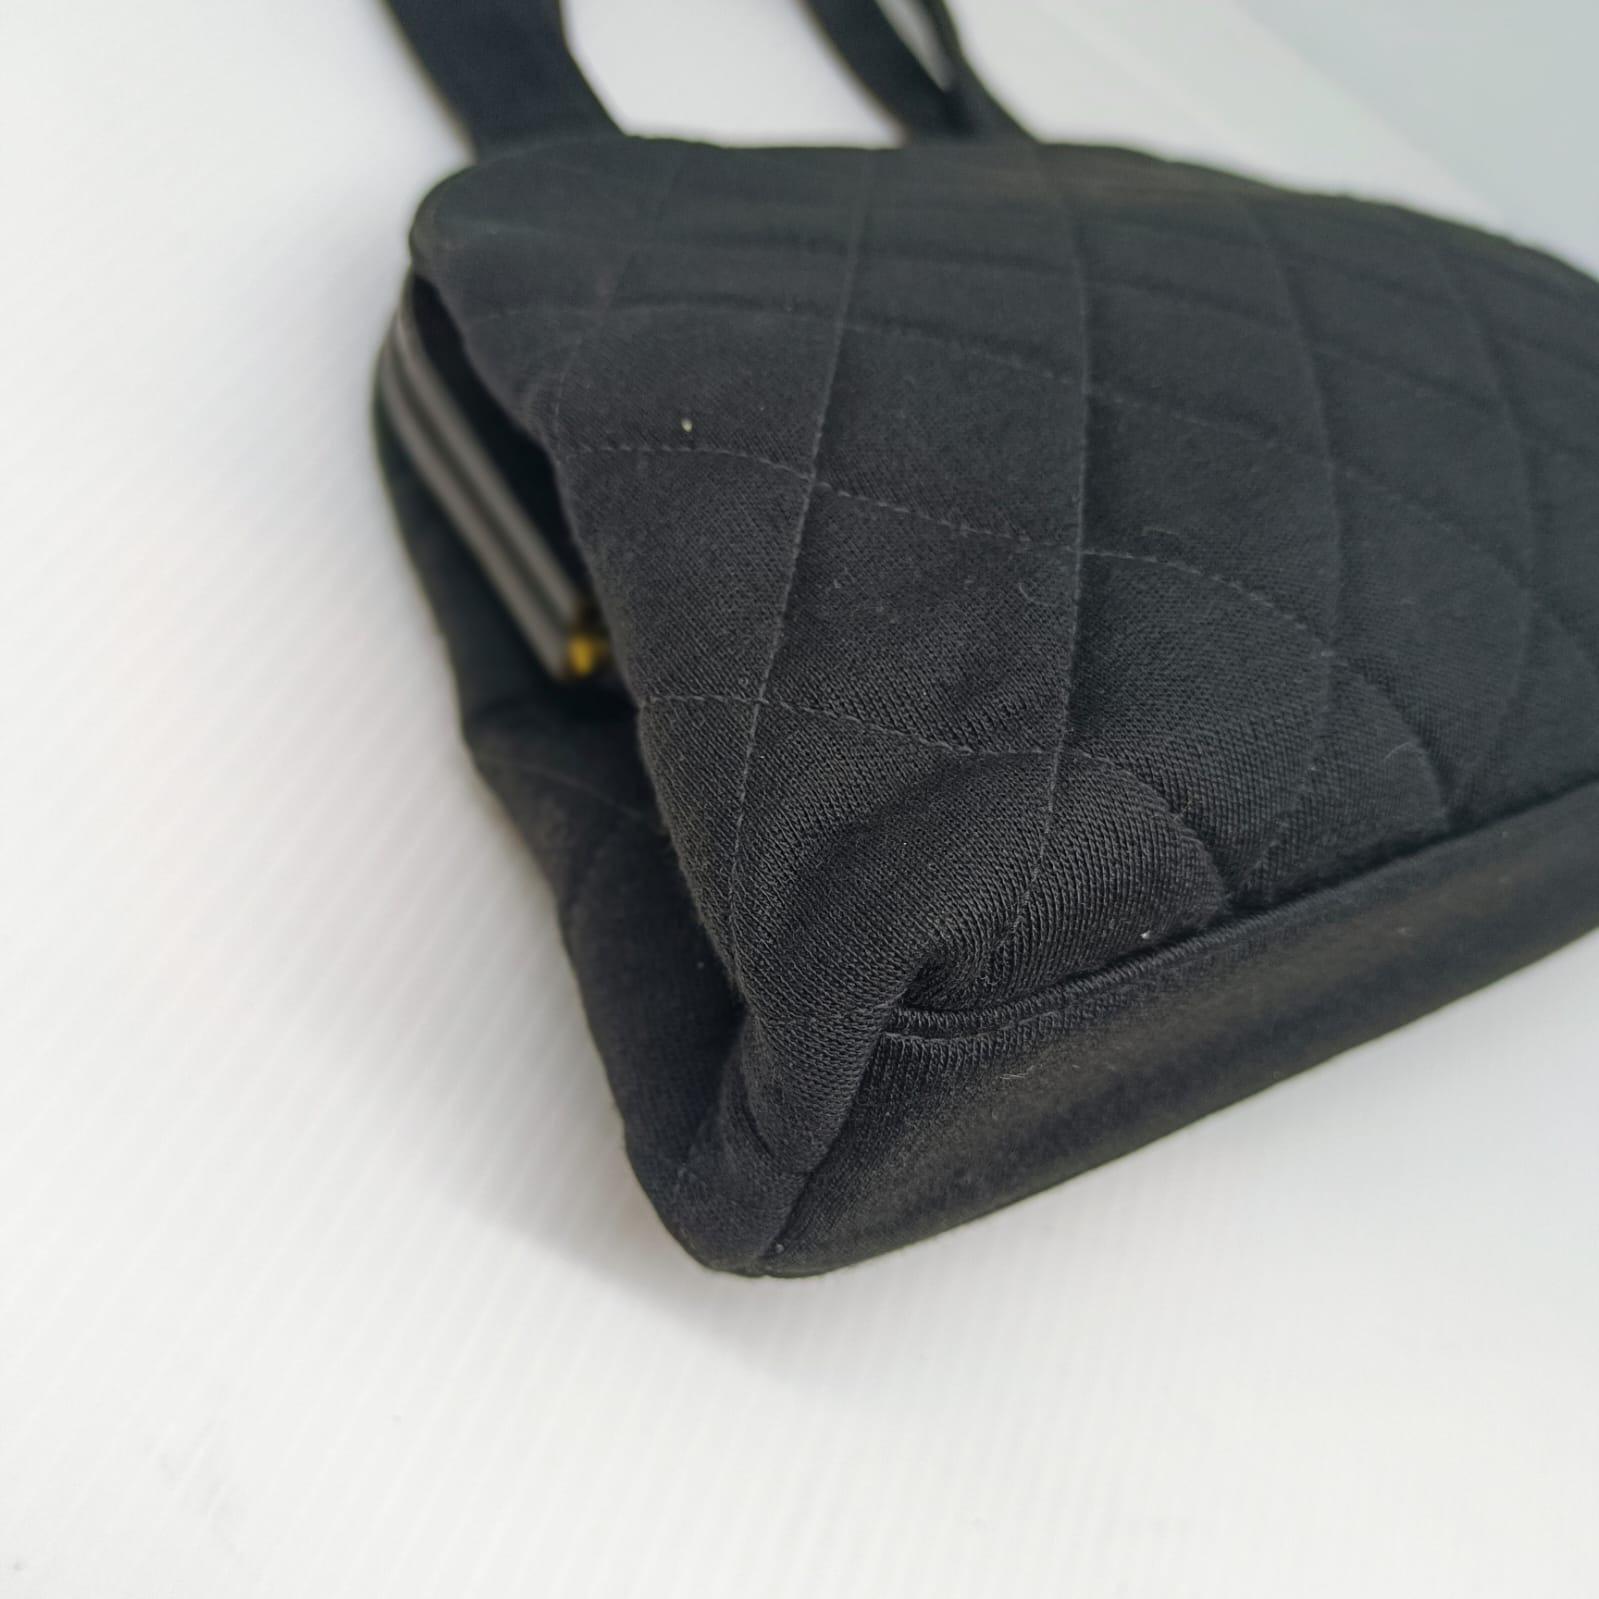 Classic vintage chanel kisslock purse in black jersey with gold hardware. Overall in good vintage condition with minor creasing on the exterior body. No significant rubbing on the corners. Visible scratch marks throughout the mouth of the leather